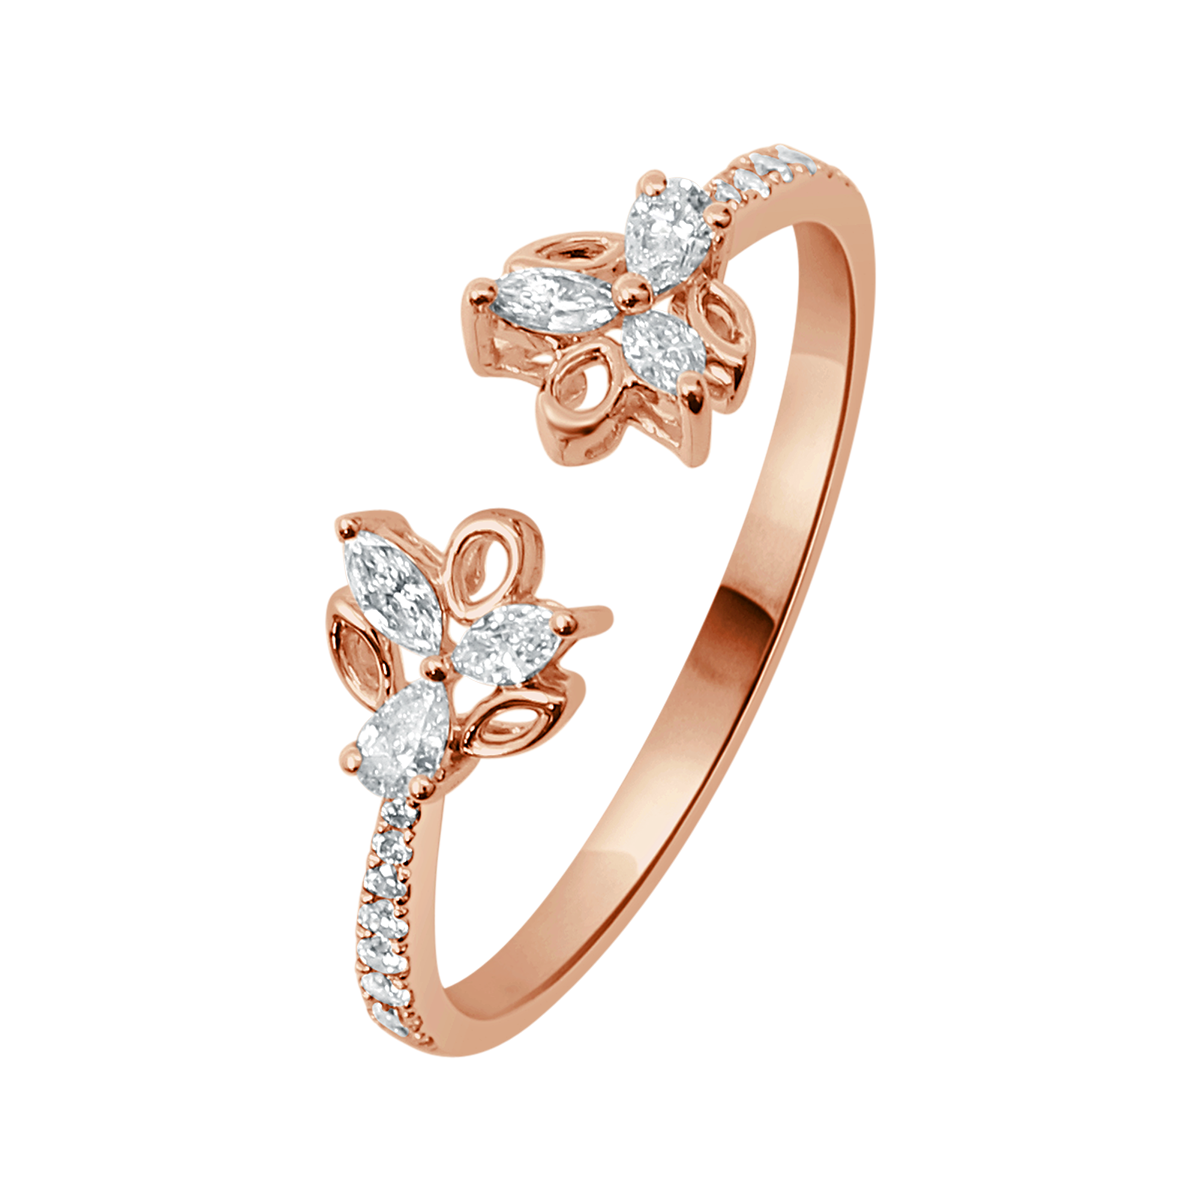 Alternate Diamond Leaves Ring In 18 K Rose Gold From Ava Collection